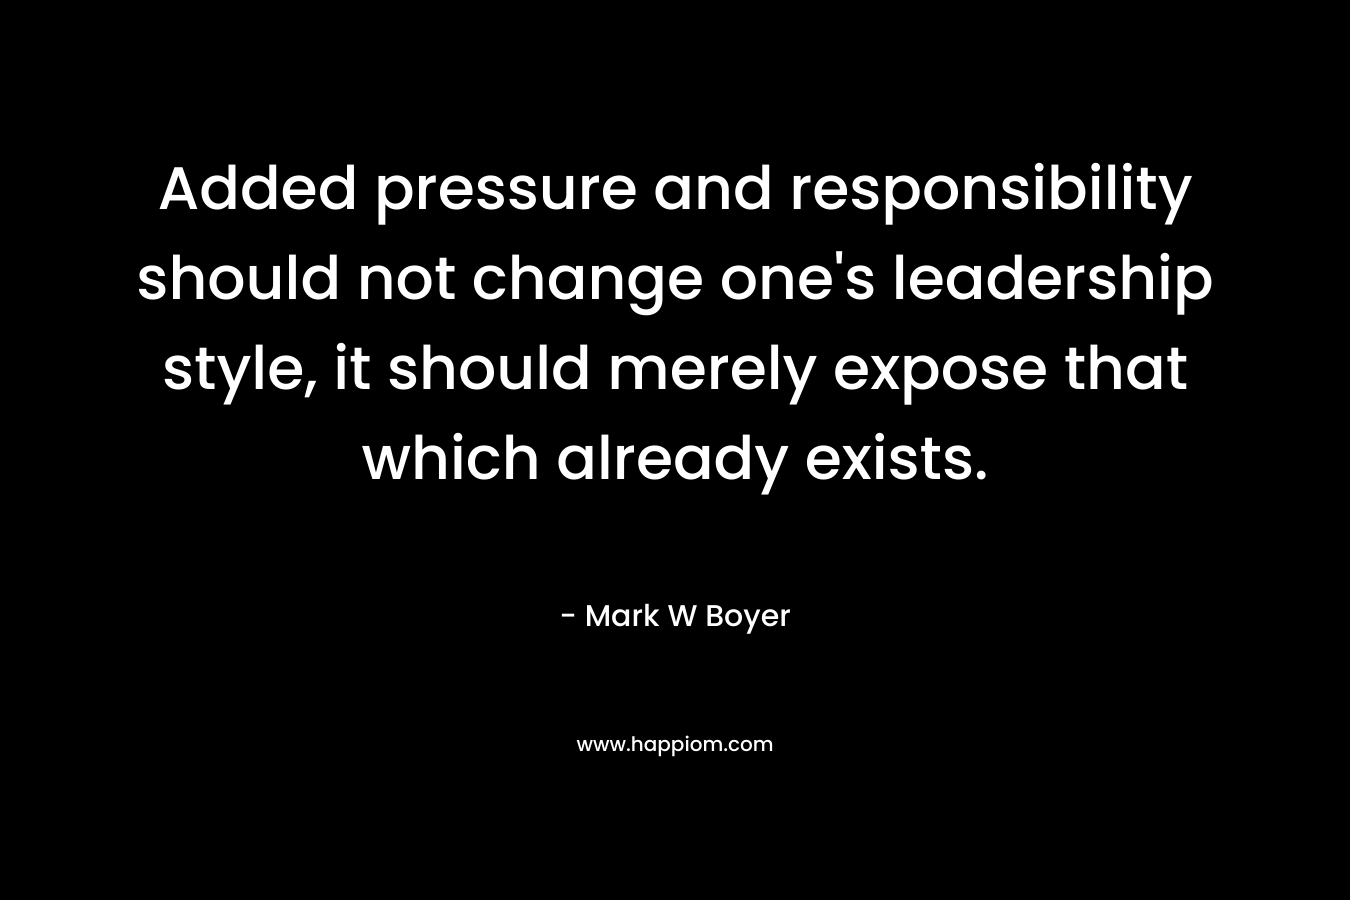 Added pressure and responsibility should not change one’s leadership style, it should merely expose that which already exists. – Mark W Boyer